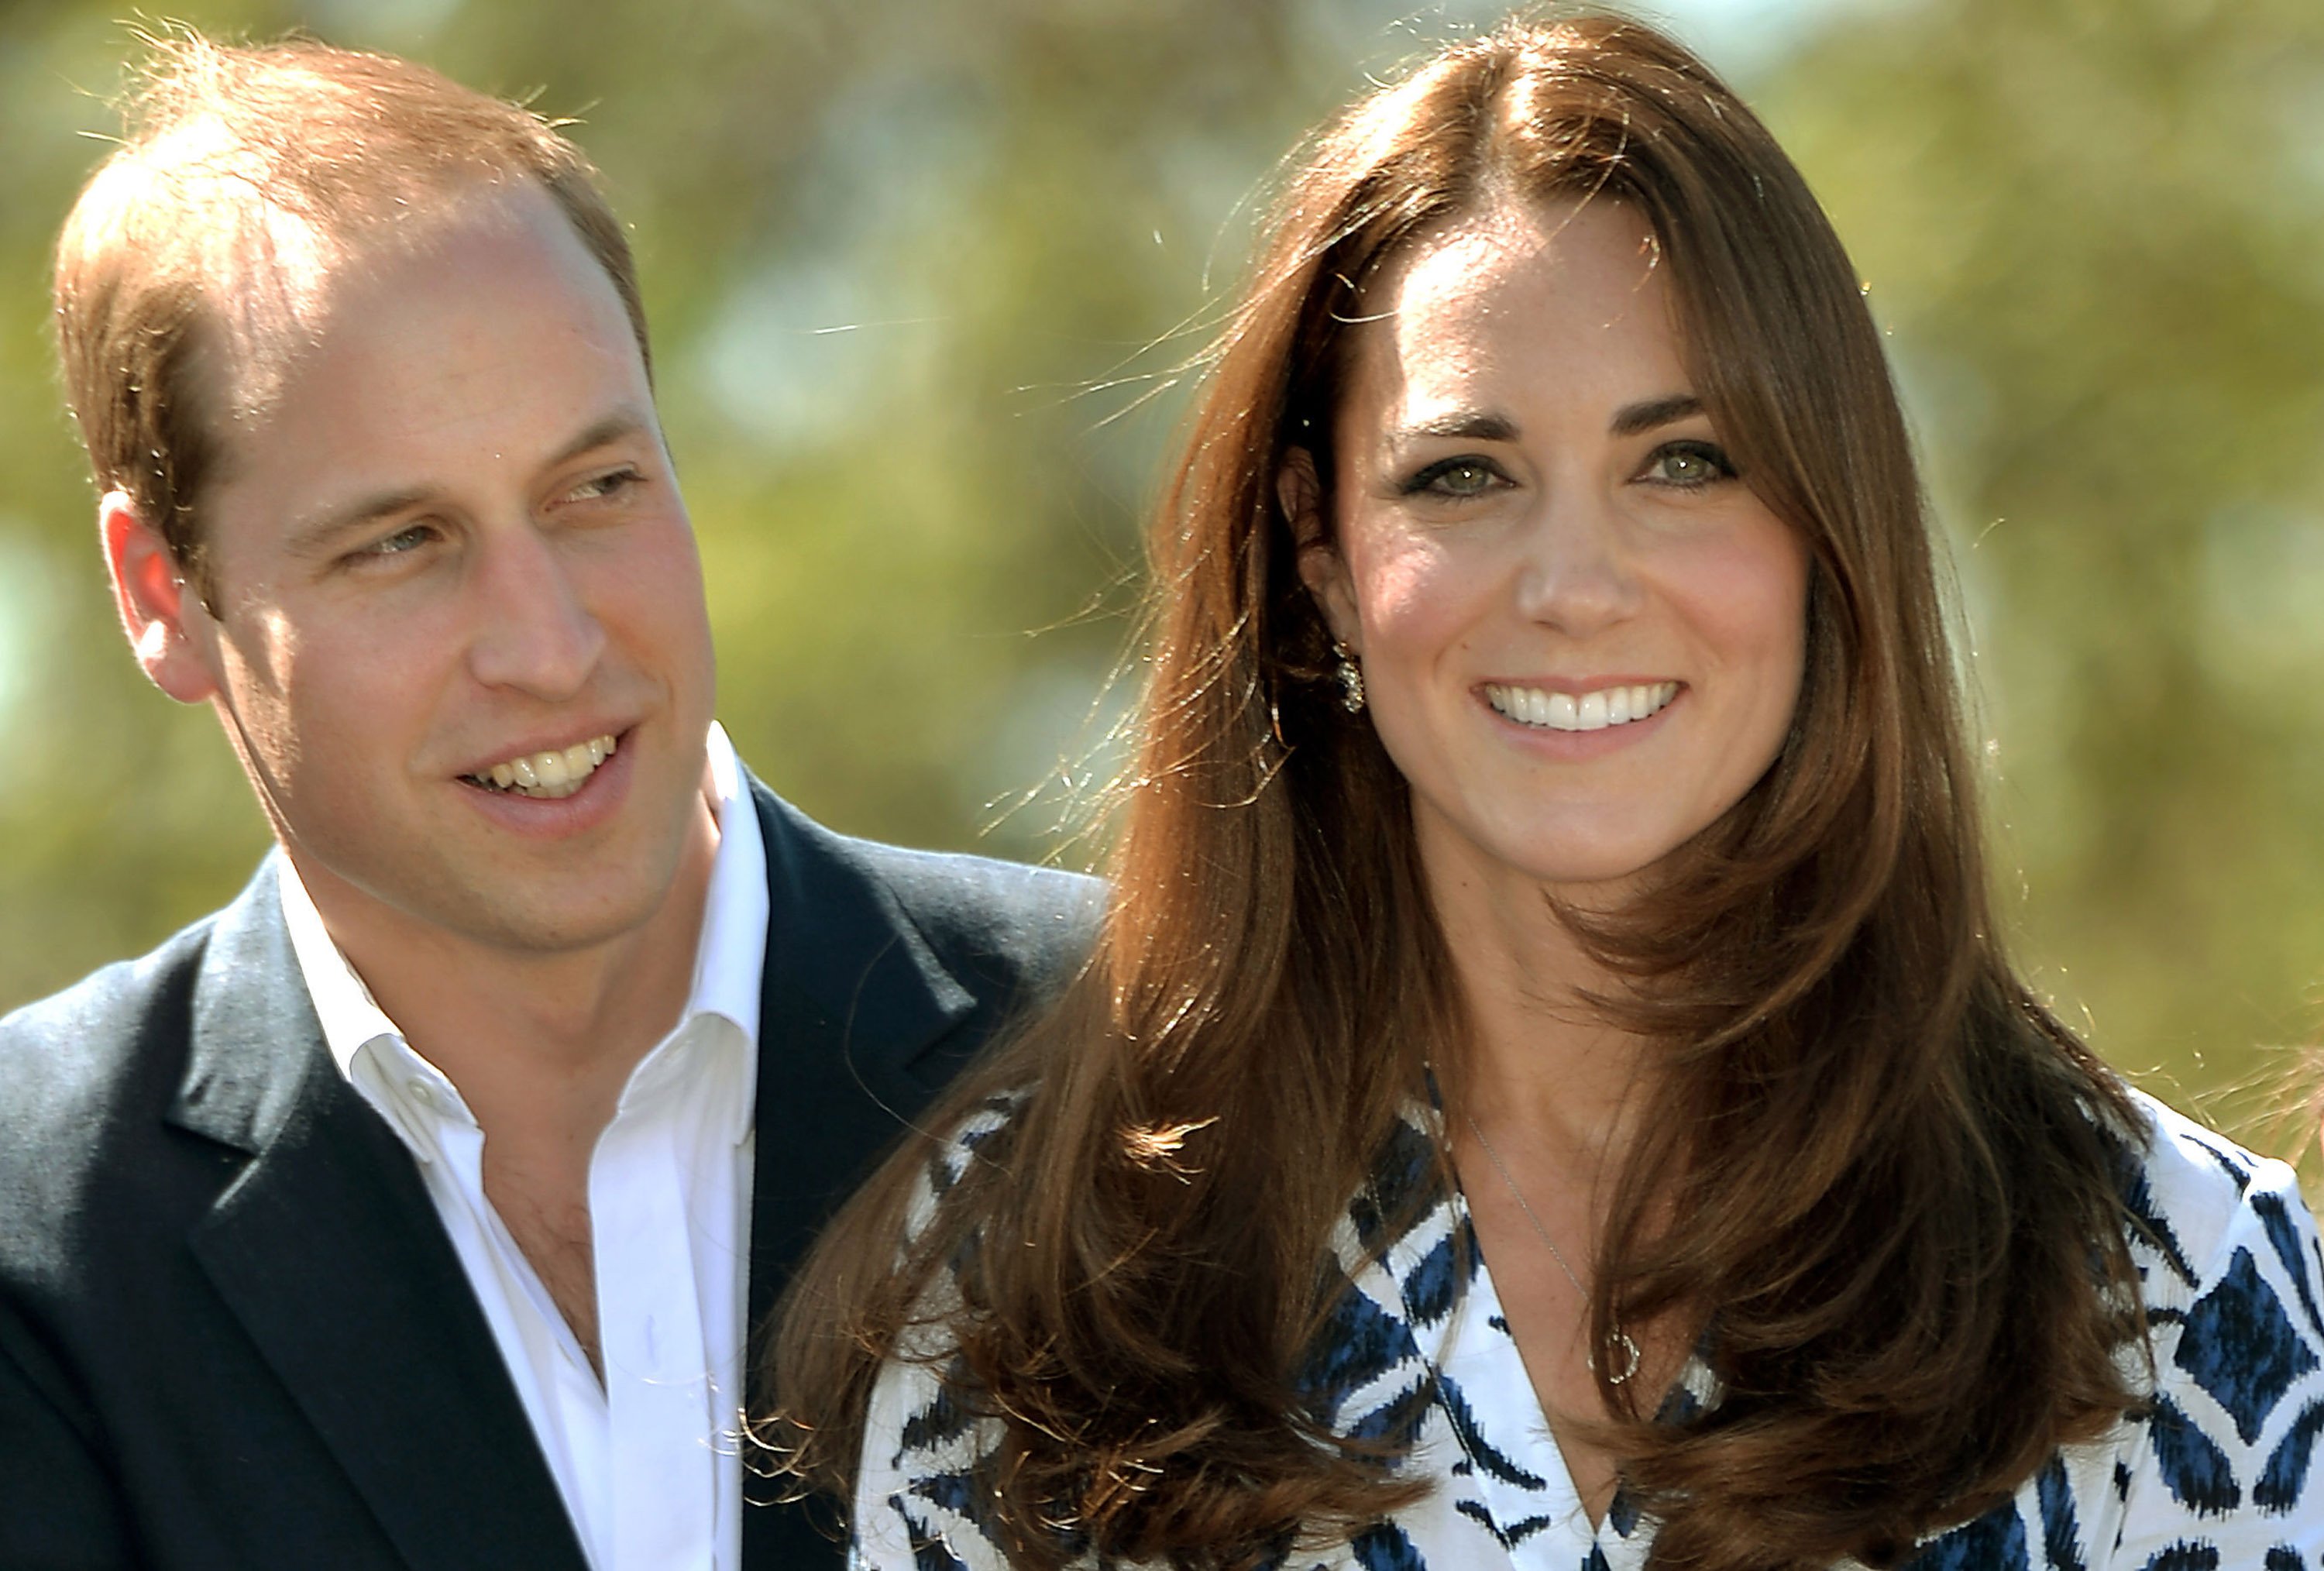 Kate Middleton and Prince William Both Have ‘Harry Potter Scars’ on Their Heads from Previous Injuries